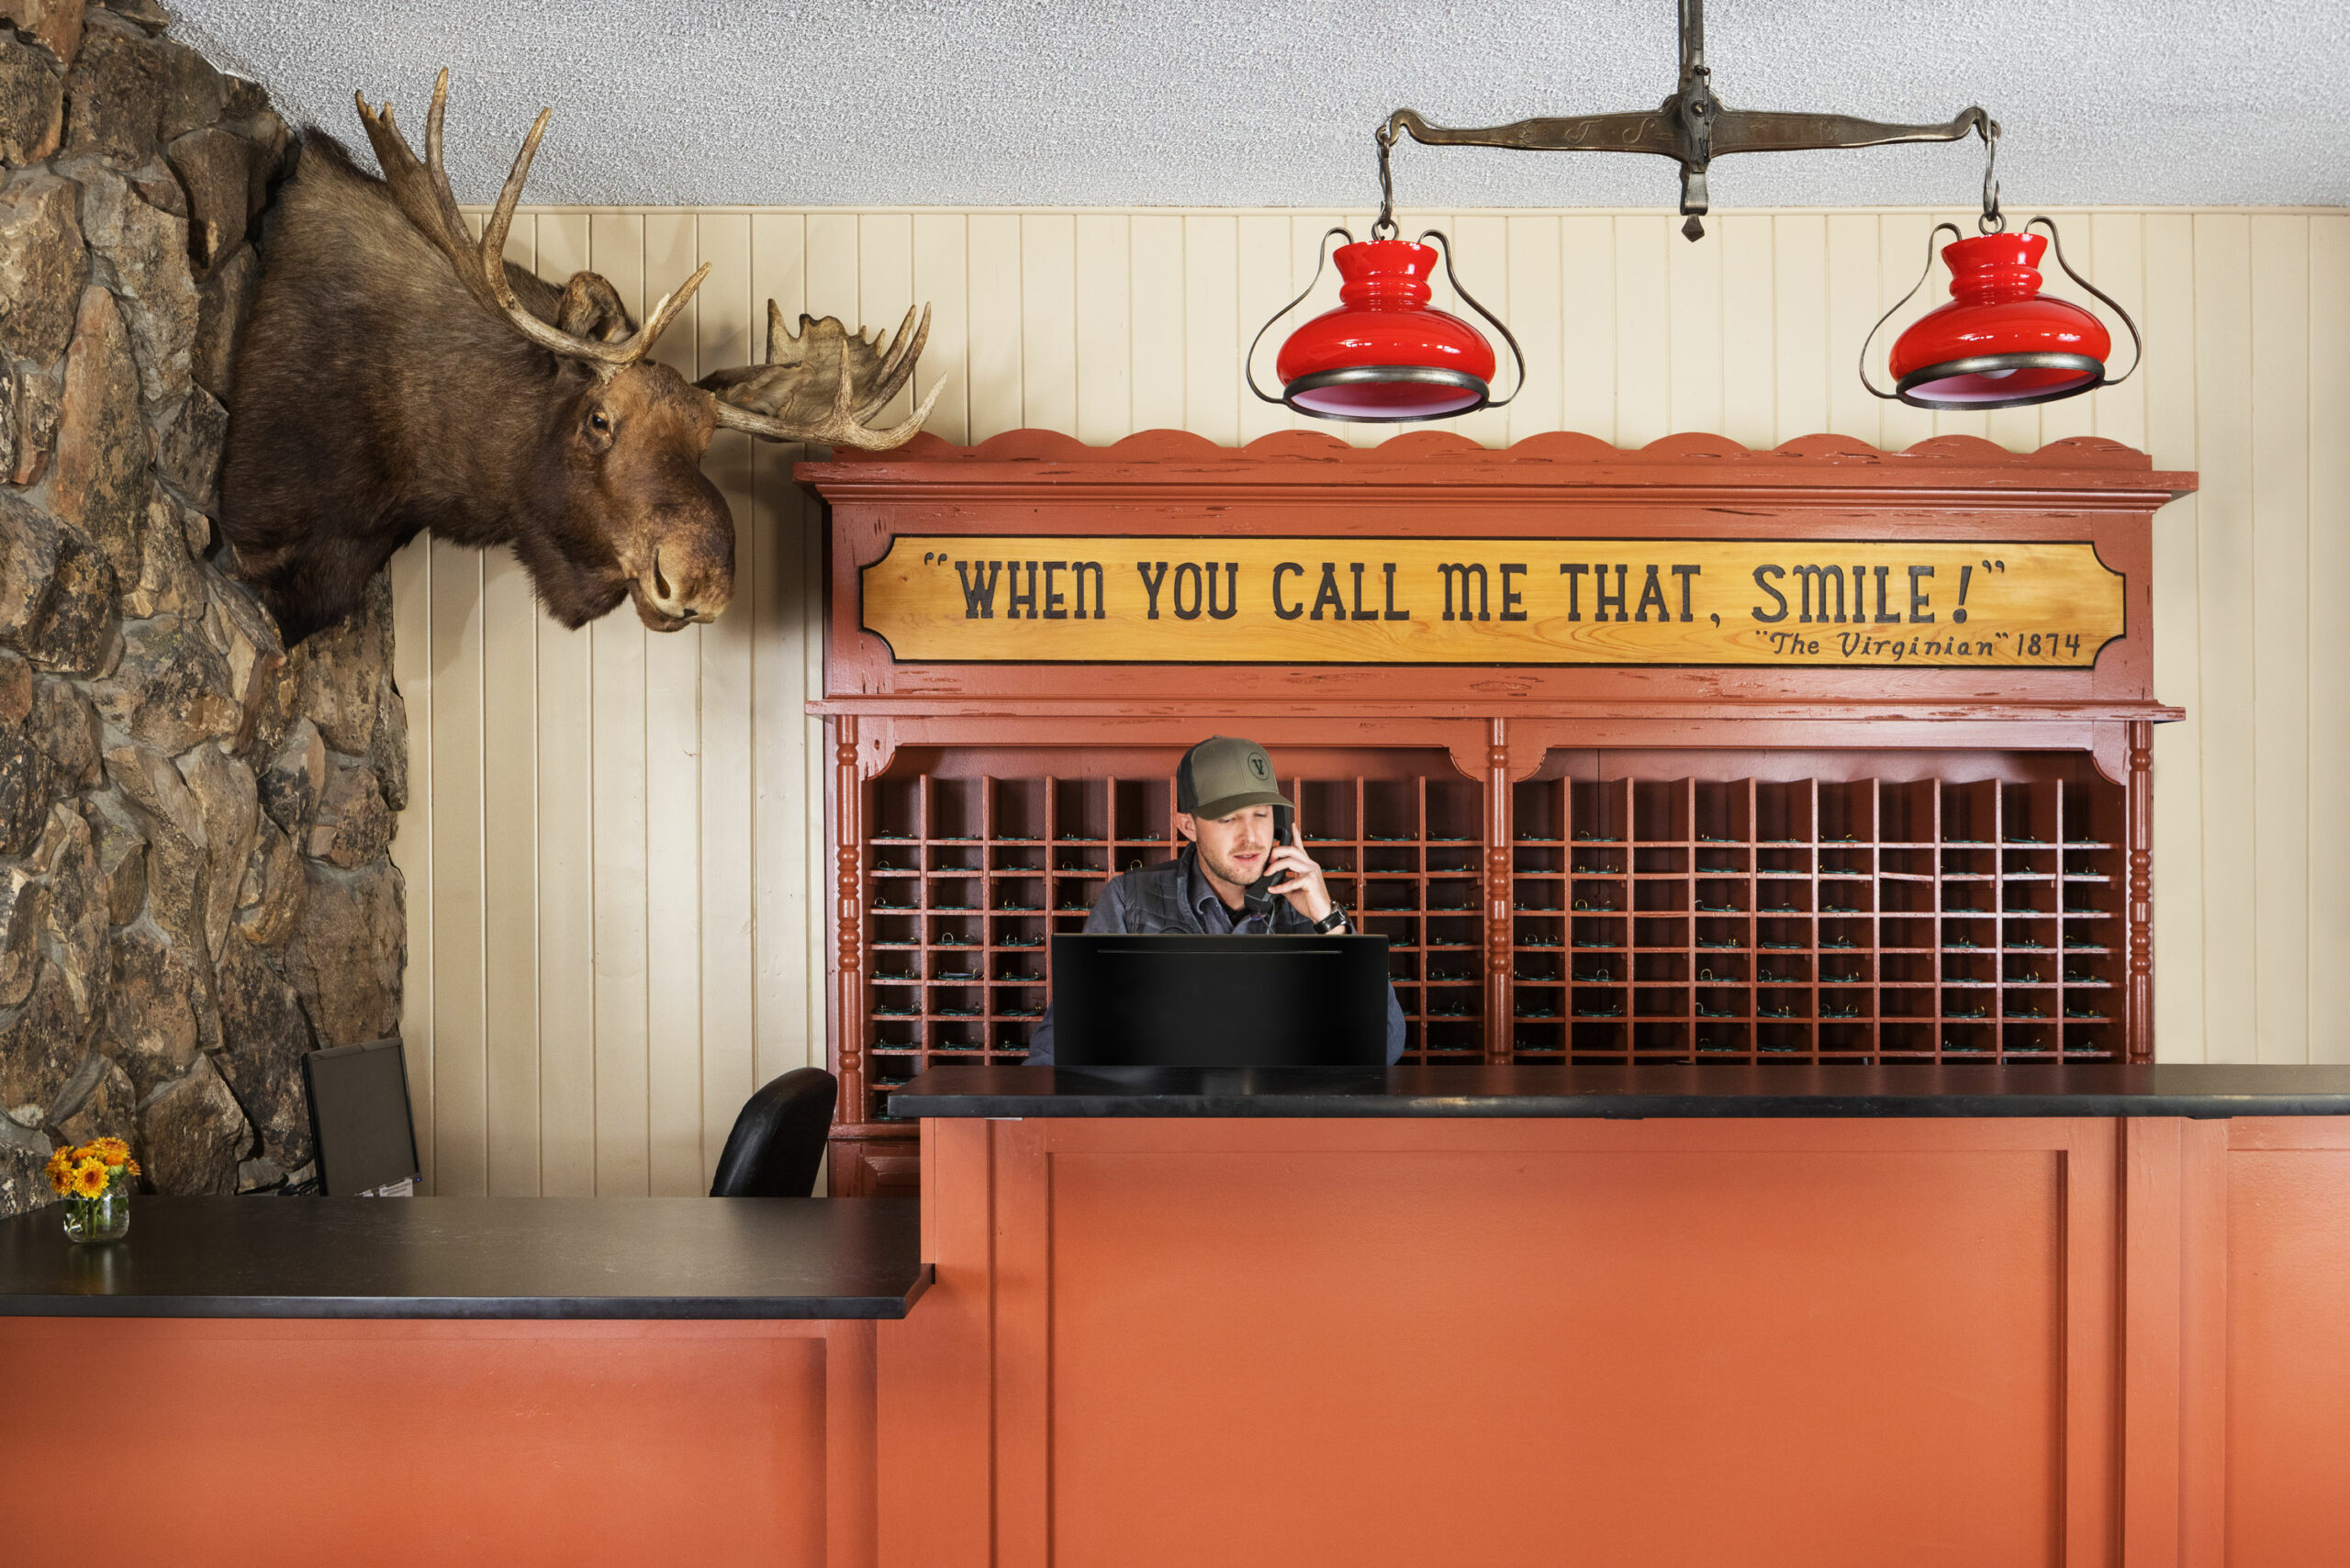 The receptionist chats on the phone near the handmade Alaska moose craft at the reception counter.